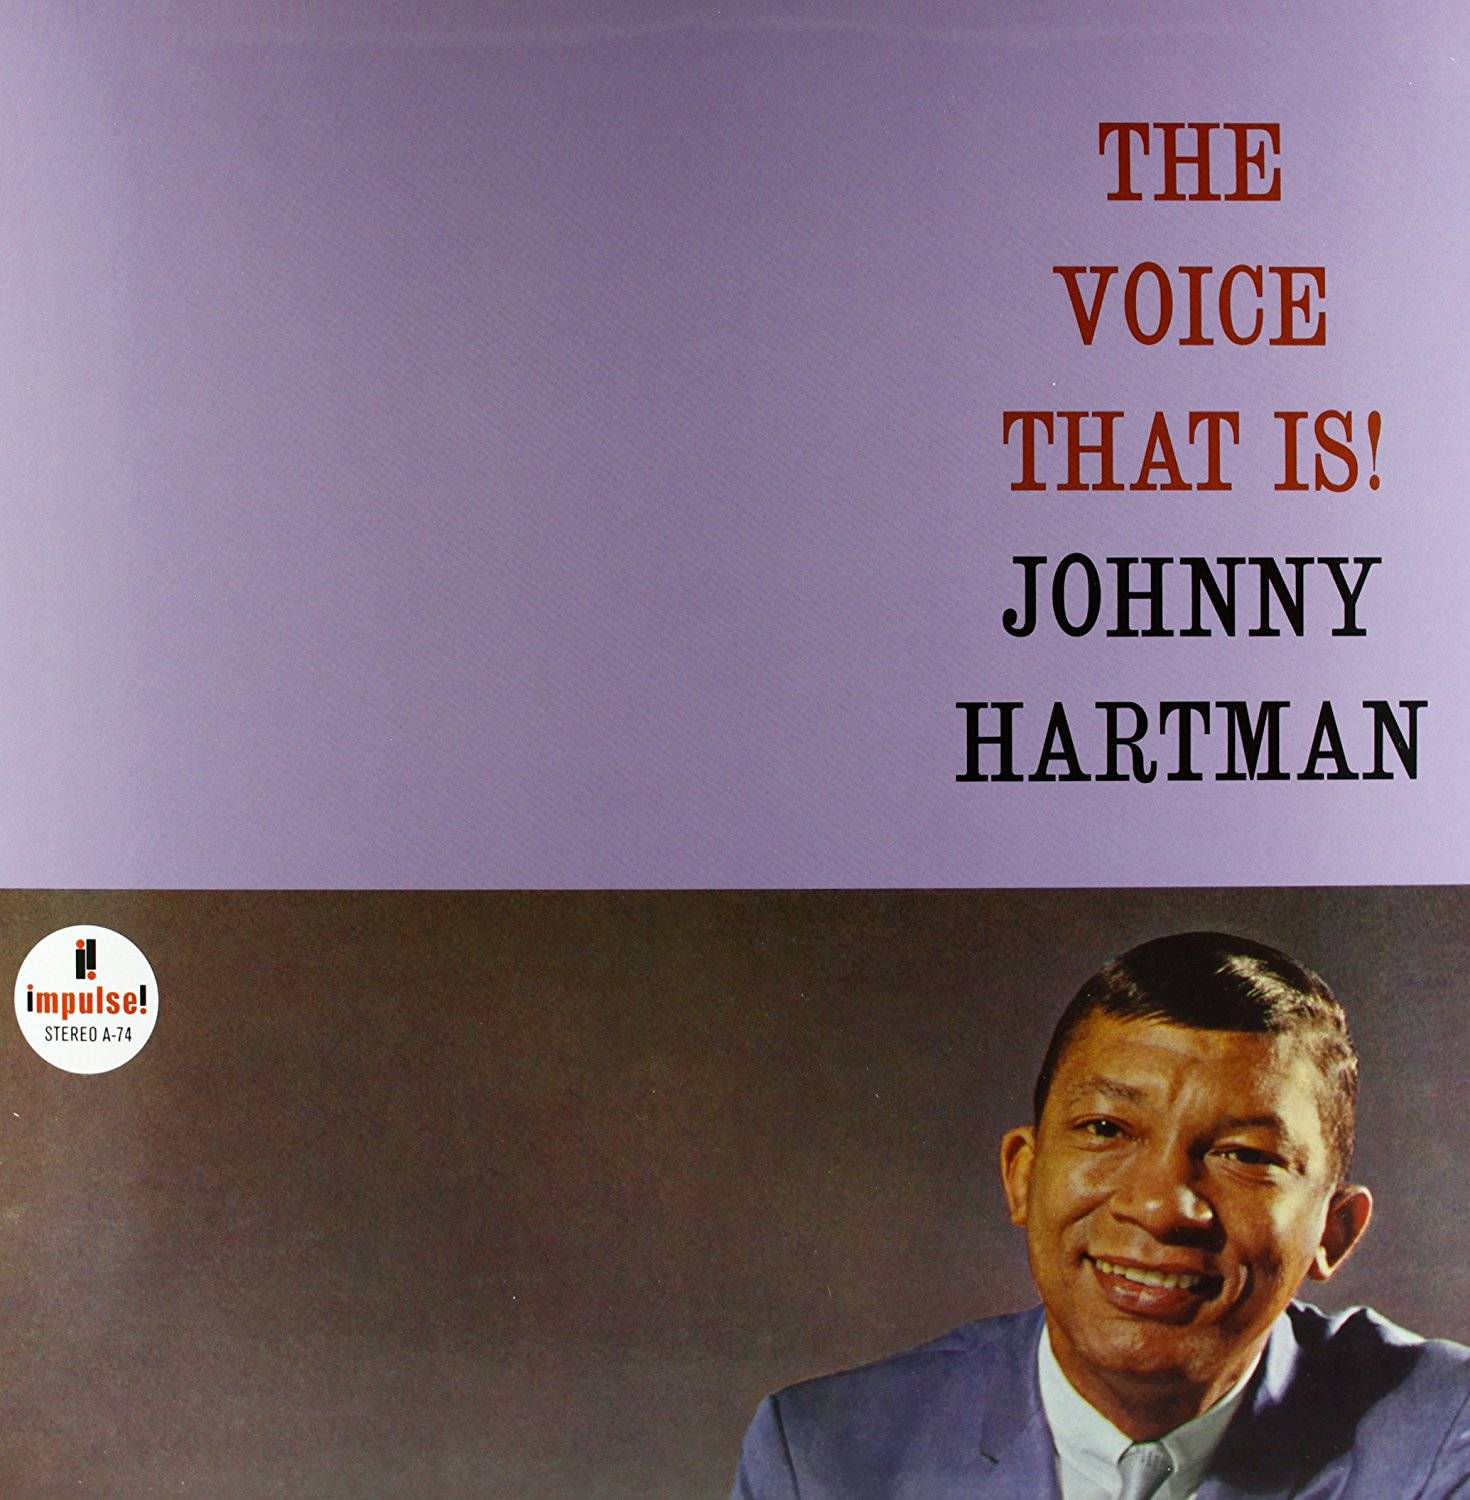 Johnny Hartman – The Voice That Is (1964) [Analogue Productions 2012] SACD ISO + DSF DSD64 + Hi-Res FLAC